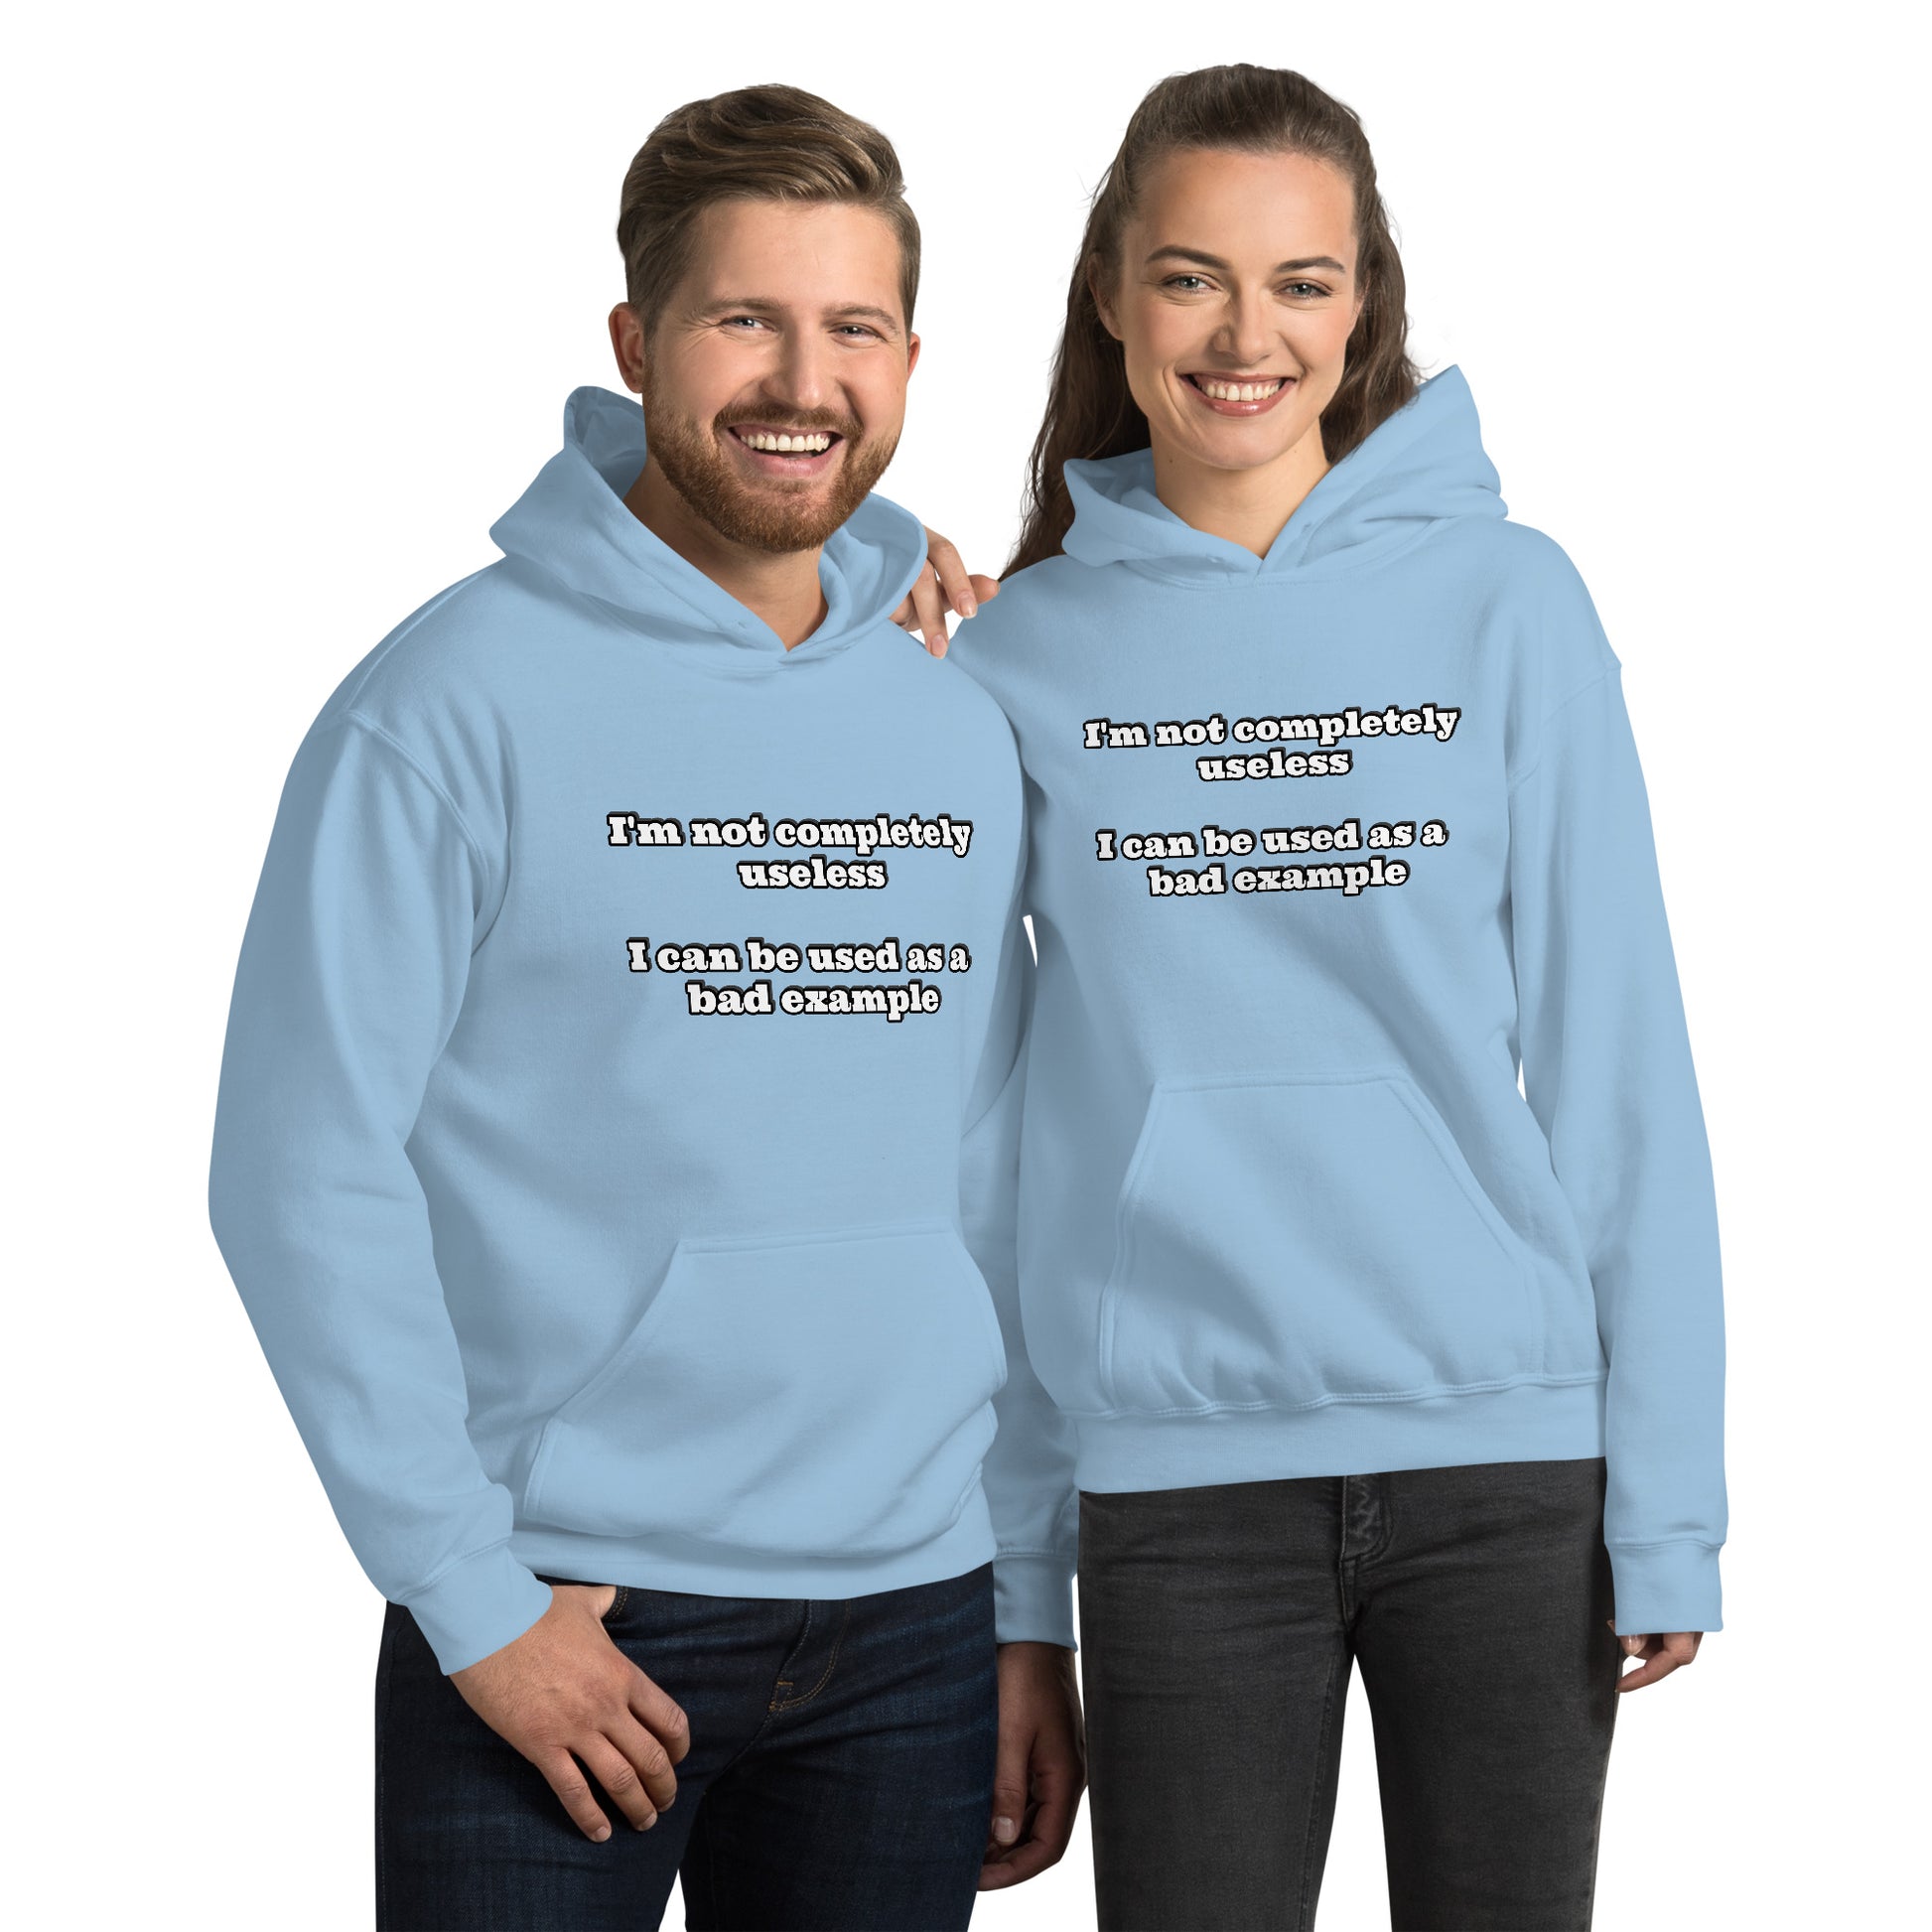 Man and women with light blue hoodie with text “I'm not completely useless I can be used as a bad example”